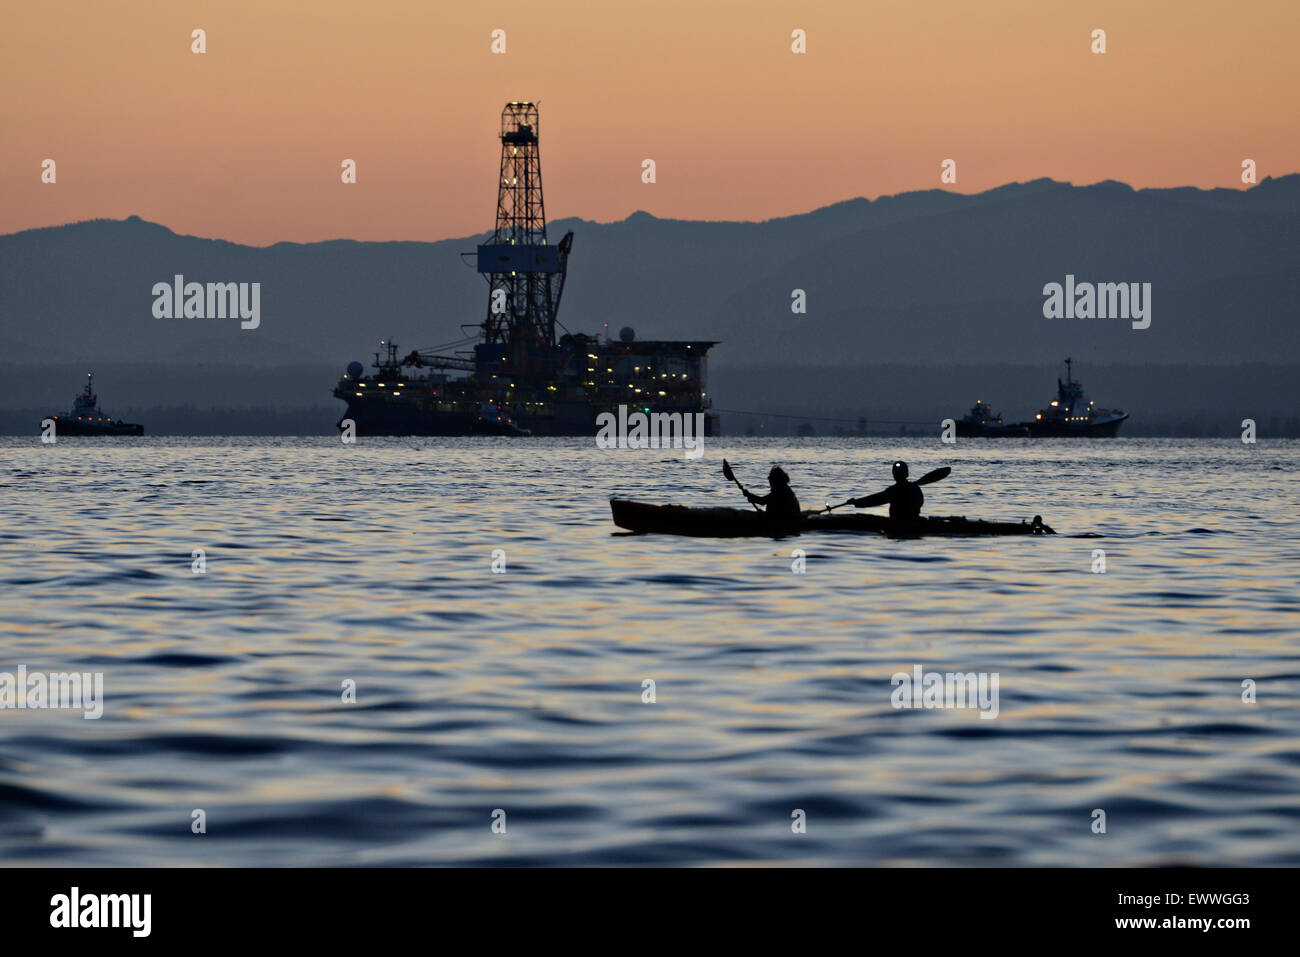 Protesters in kayaks known as kayaktivists attempt to block the deep arctic oil exploration ship Noble Discover as it transits the Puget Sound after departing June 30, 2015 from the Port of Everett, Washington. The Coast Guard enforced a 500-yard safety zone around the vessel as activists continued to try and block the ship. Stock Photo